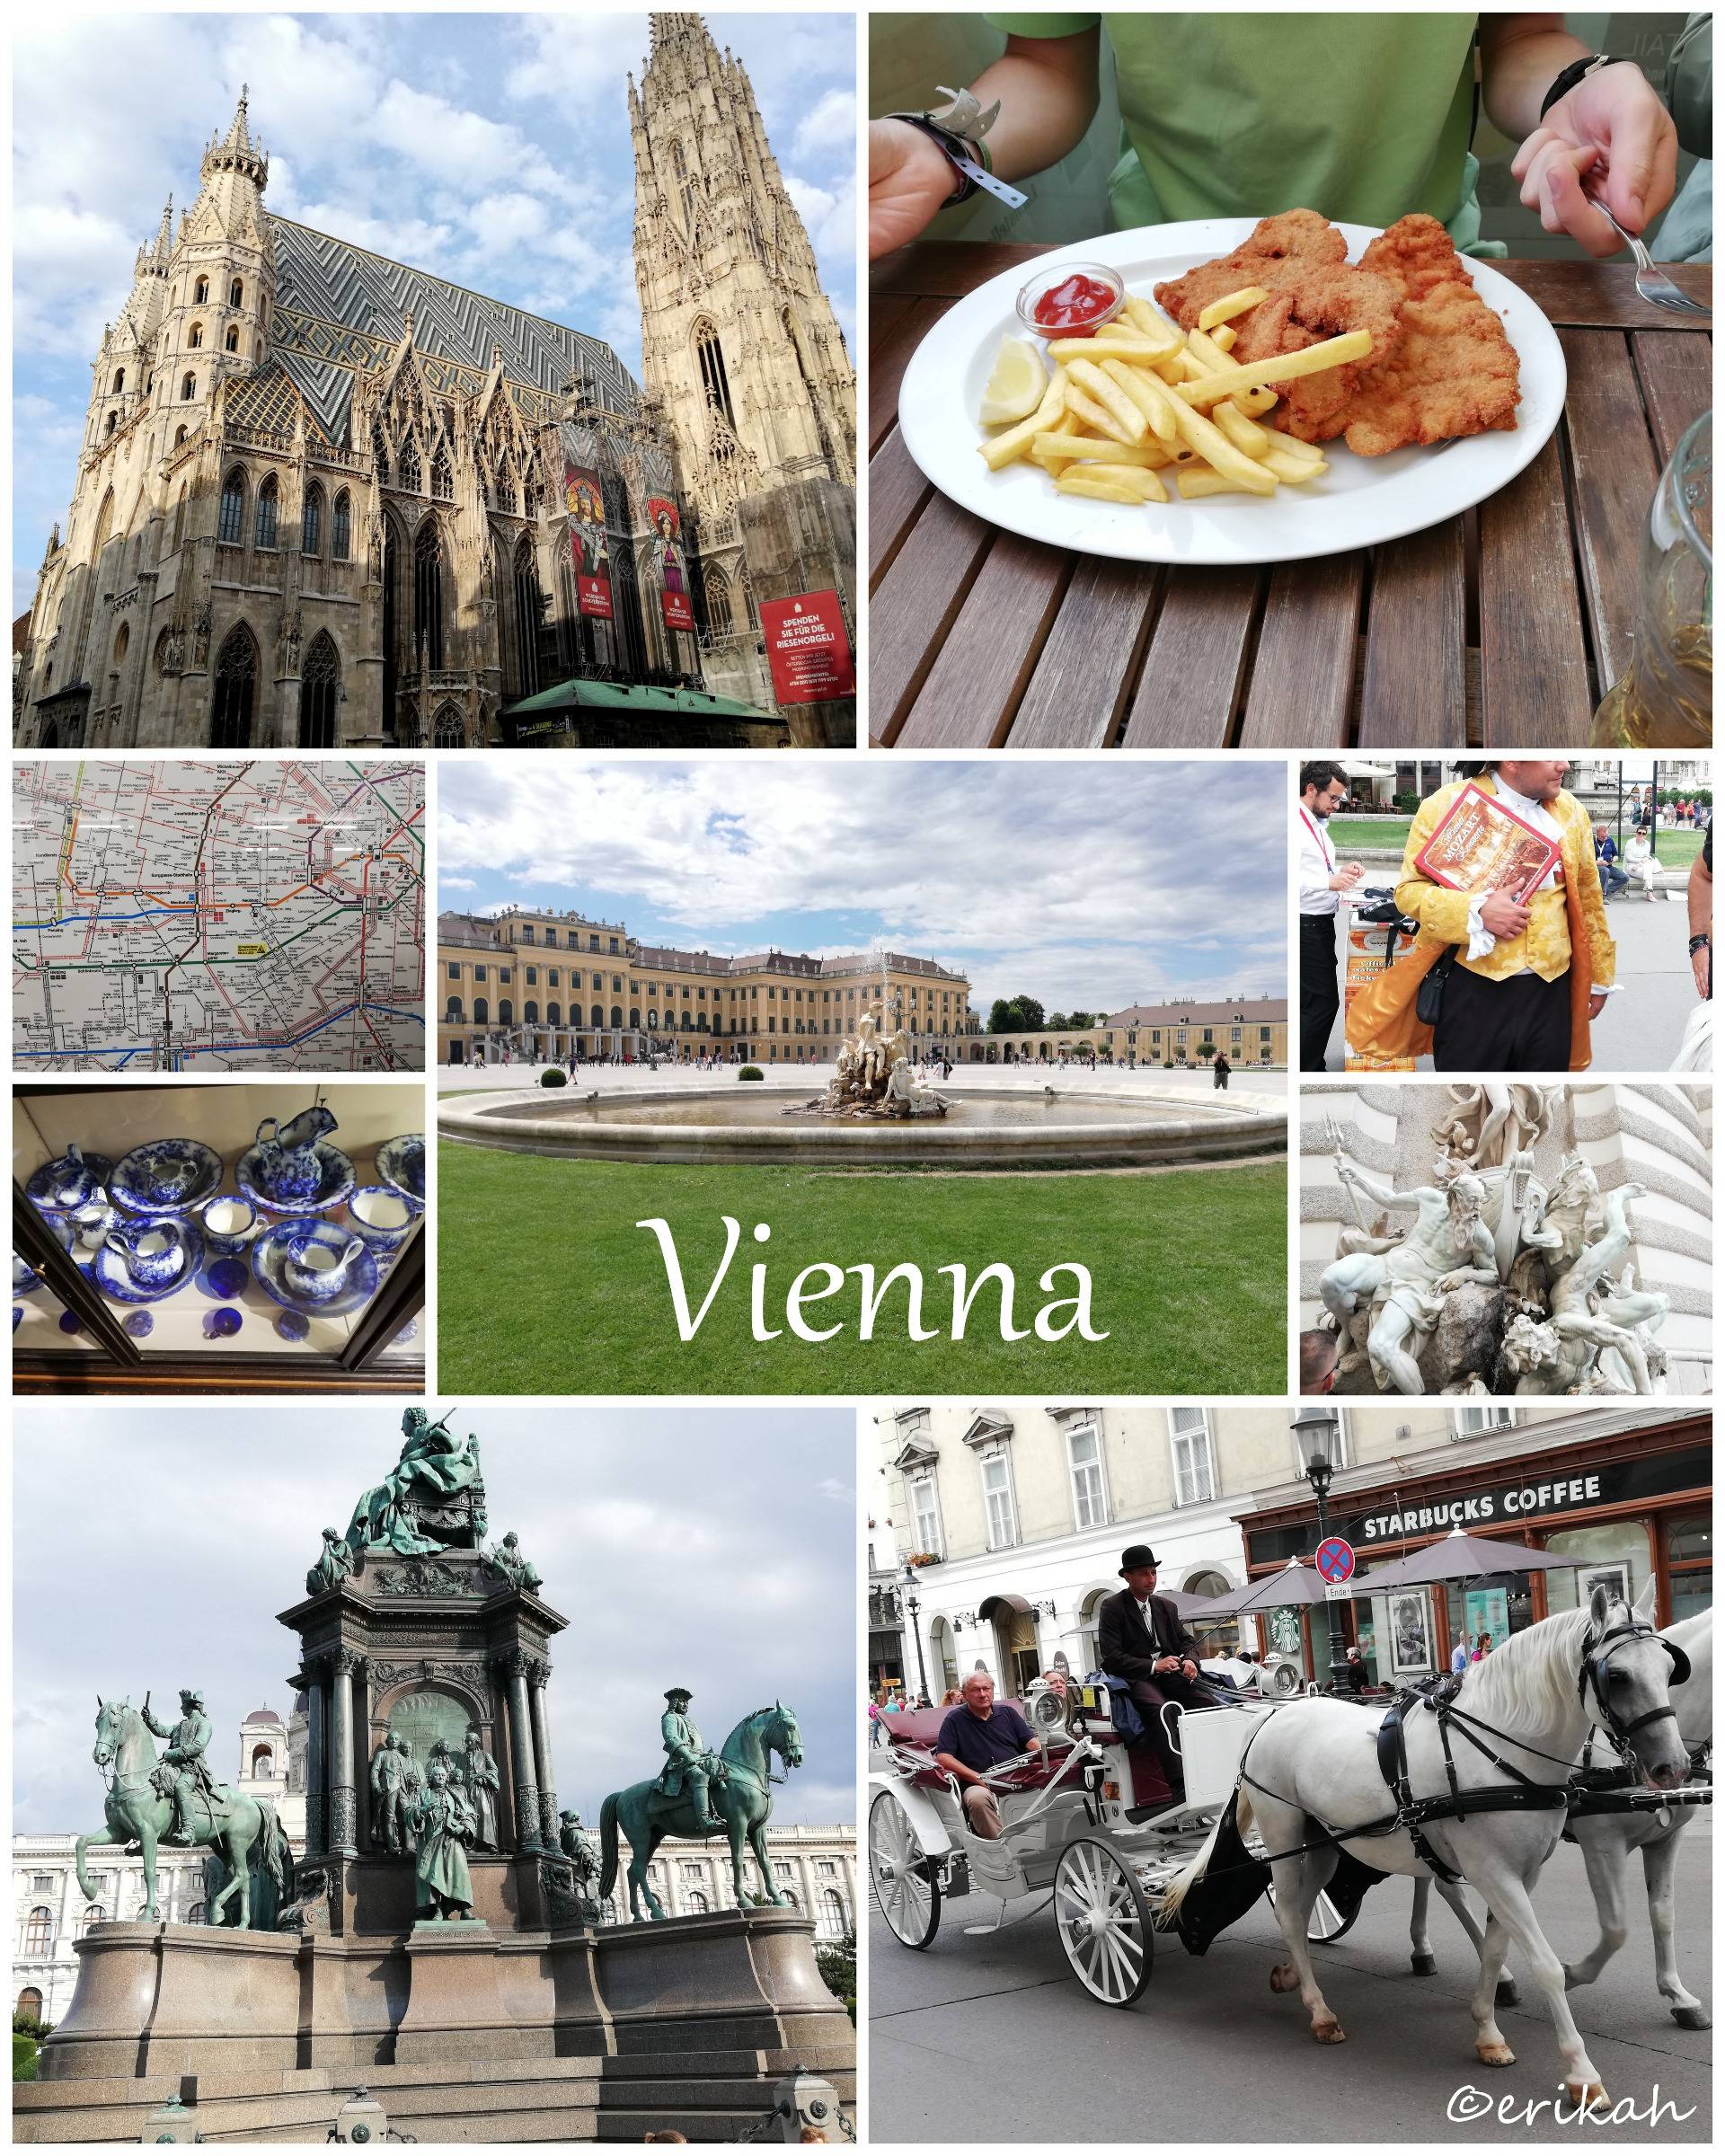 Kindness I encountered from strangers while traveling: Vienna, the city where everyone is helping